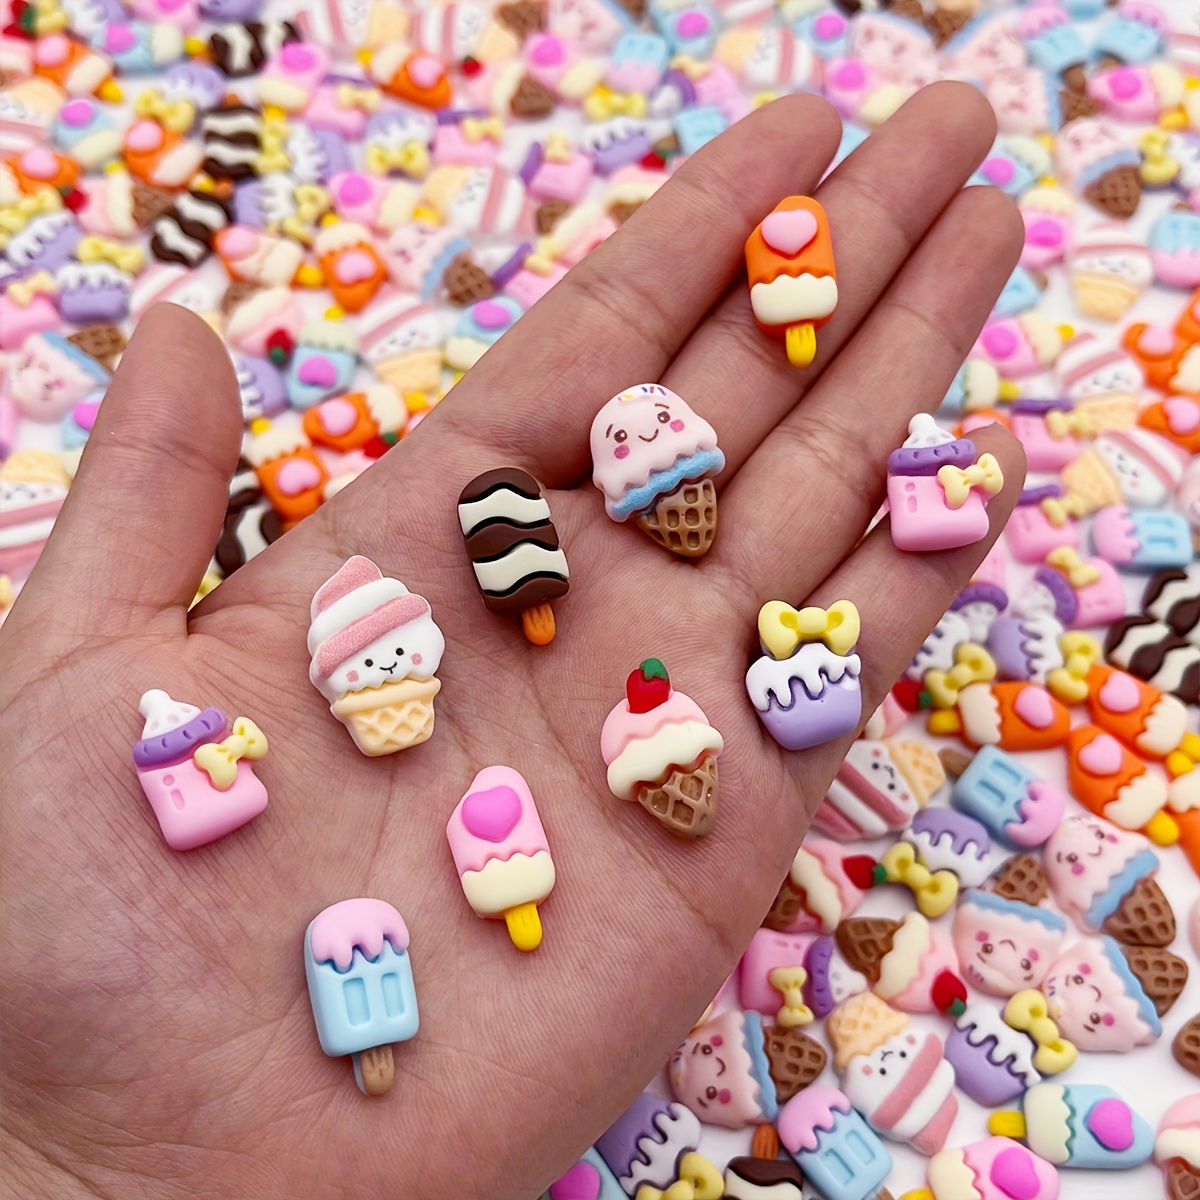 72 Pcs Valentine's Day Candy Heart Charms Pendant Love Resin Necklace Heart  Charms Jewelry Making Charms with Hole for DIY Bracelet Earring Craft